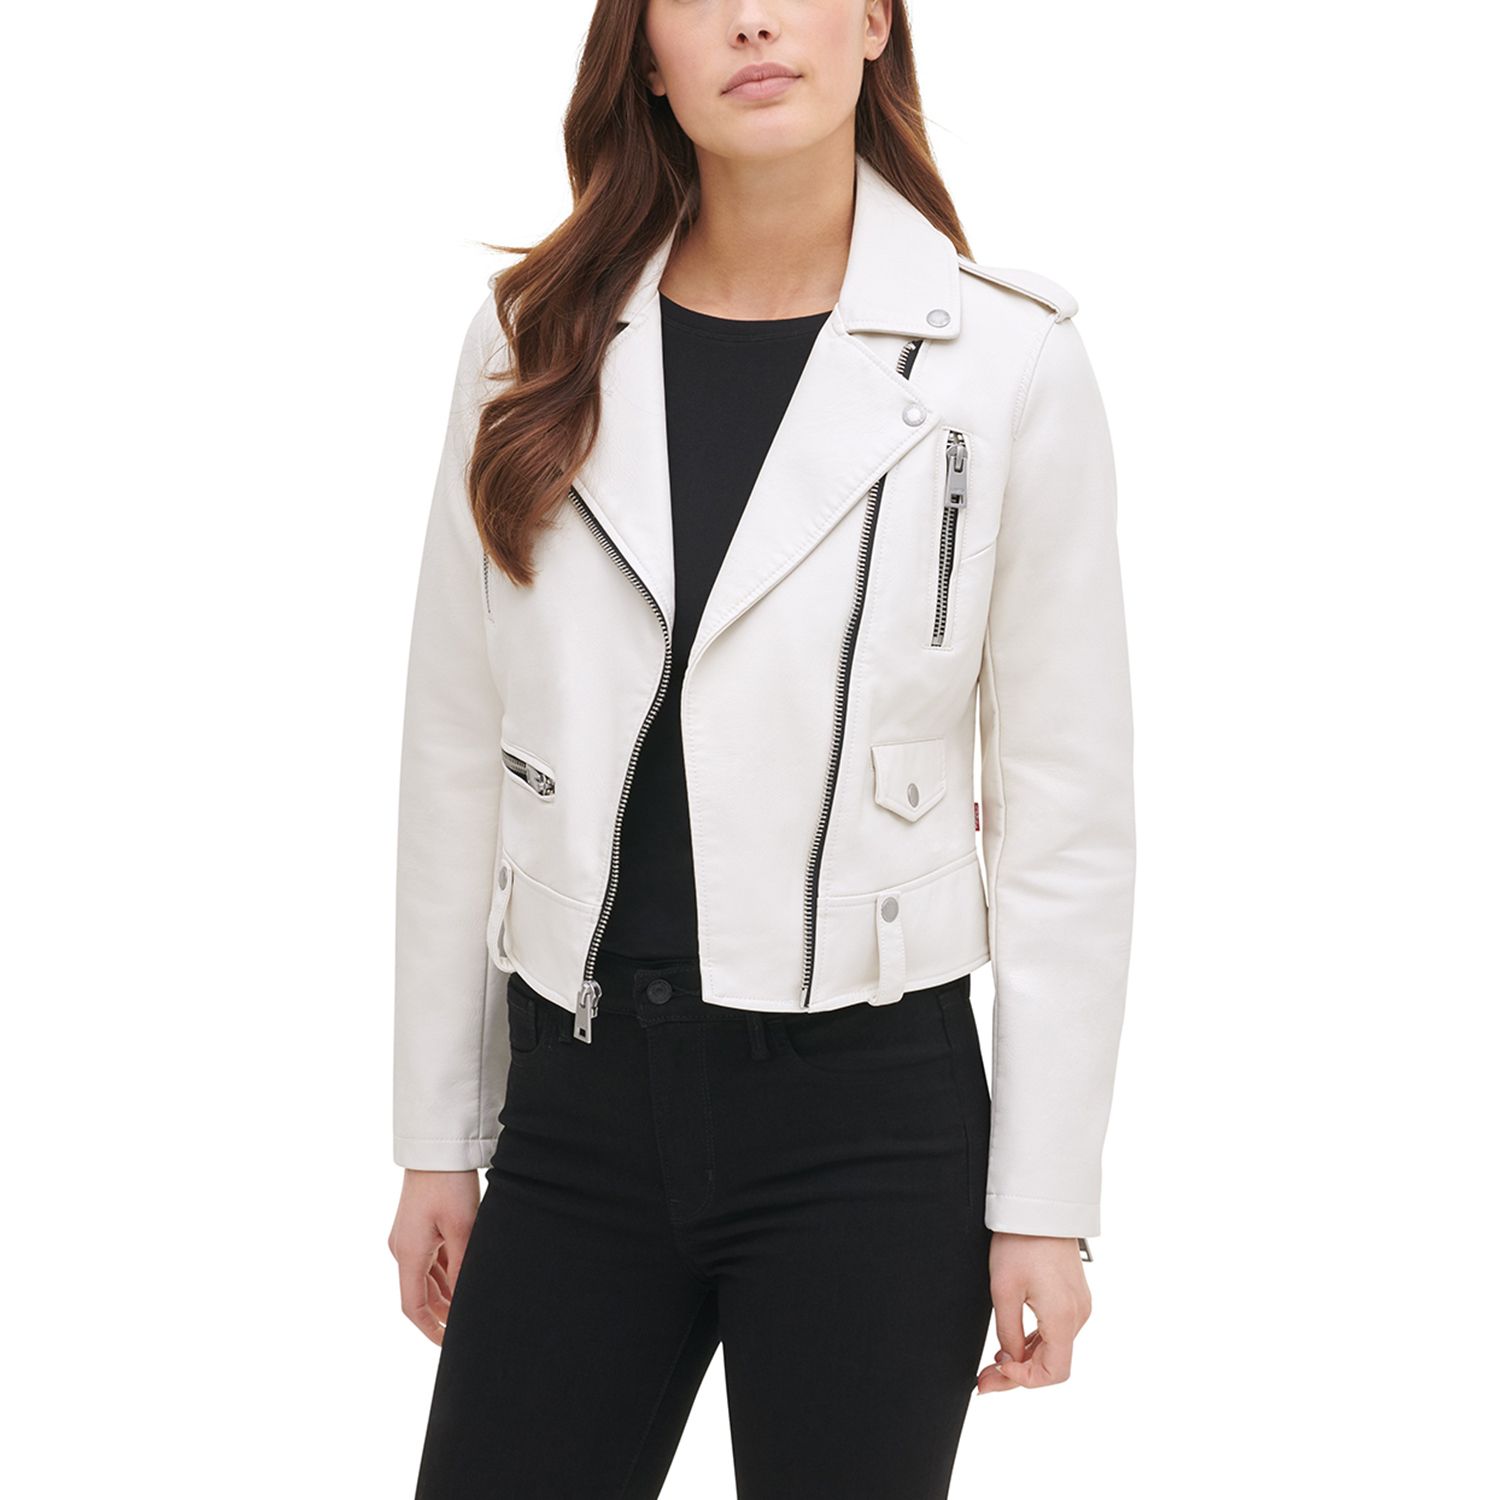 Image for Levi's Women's Classic Faux Leather Asymmetrical Motorcycle Jacket at Kohl's.